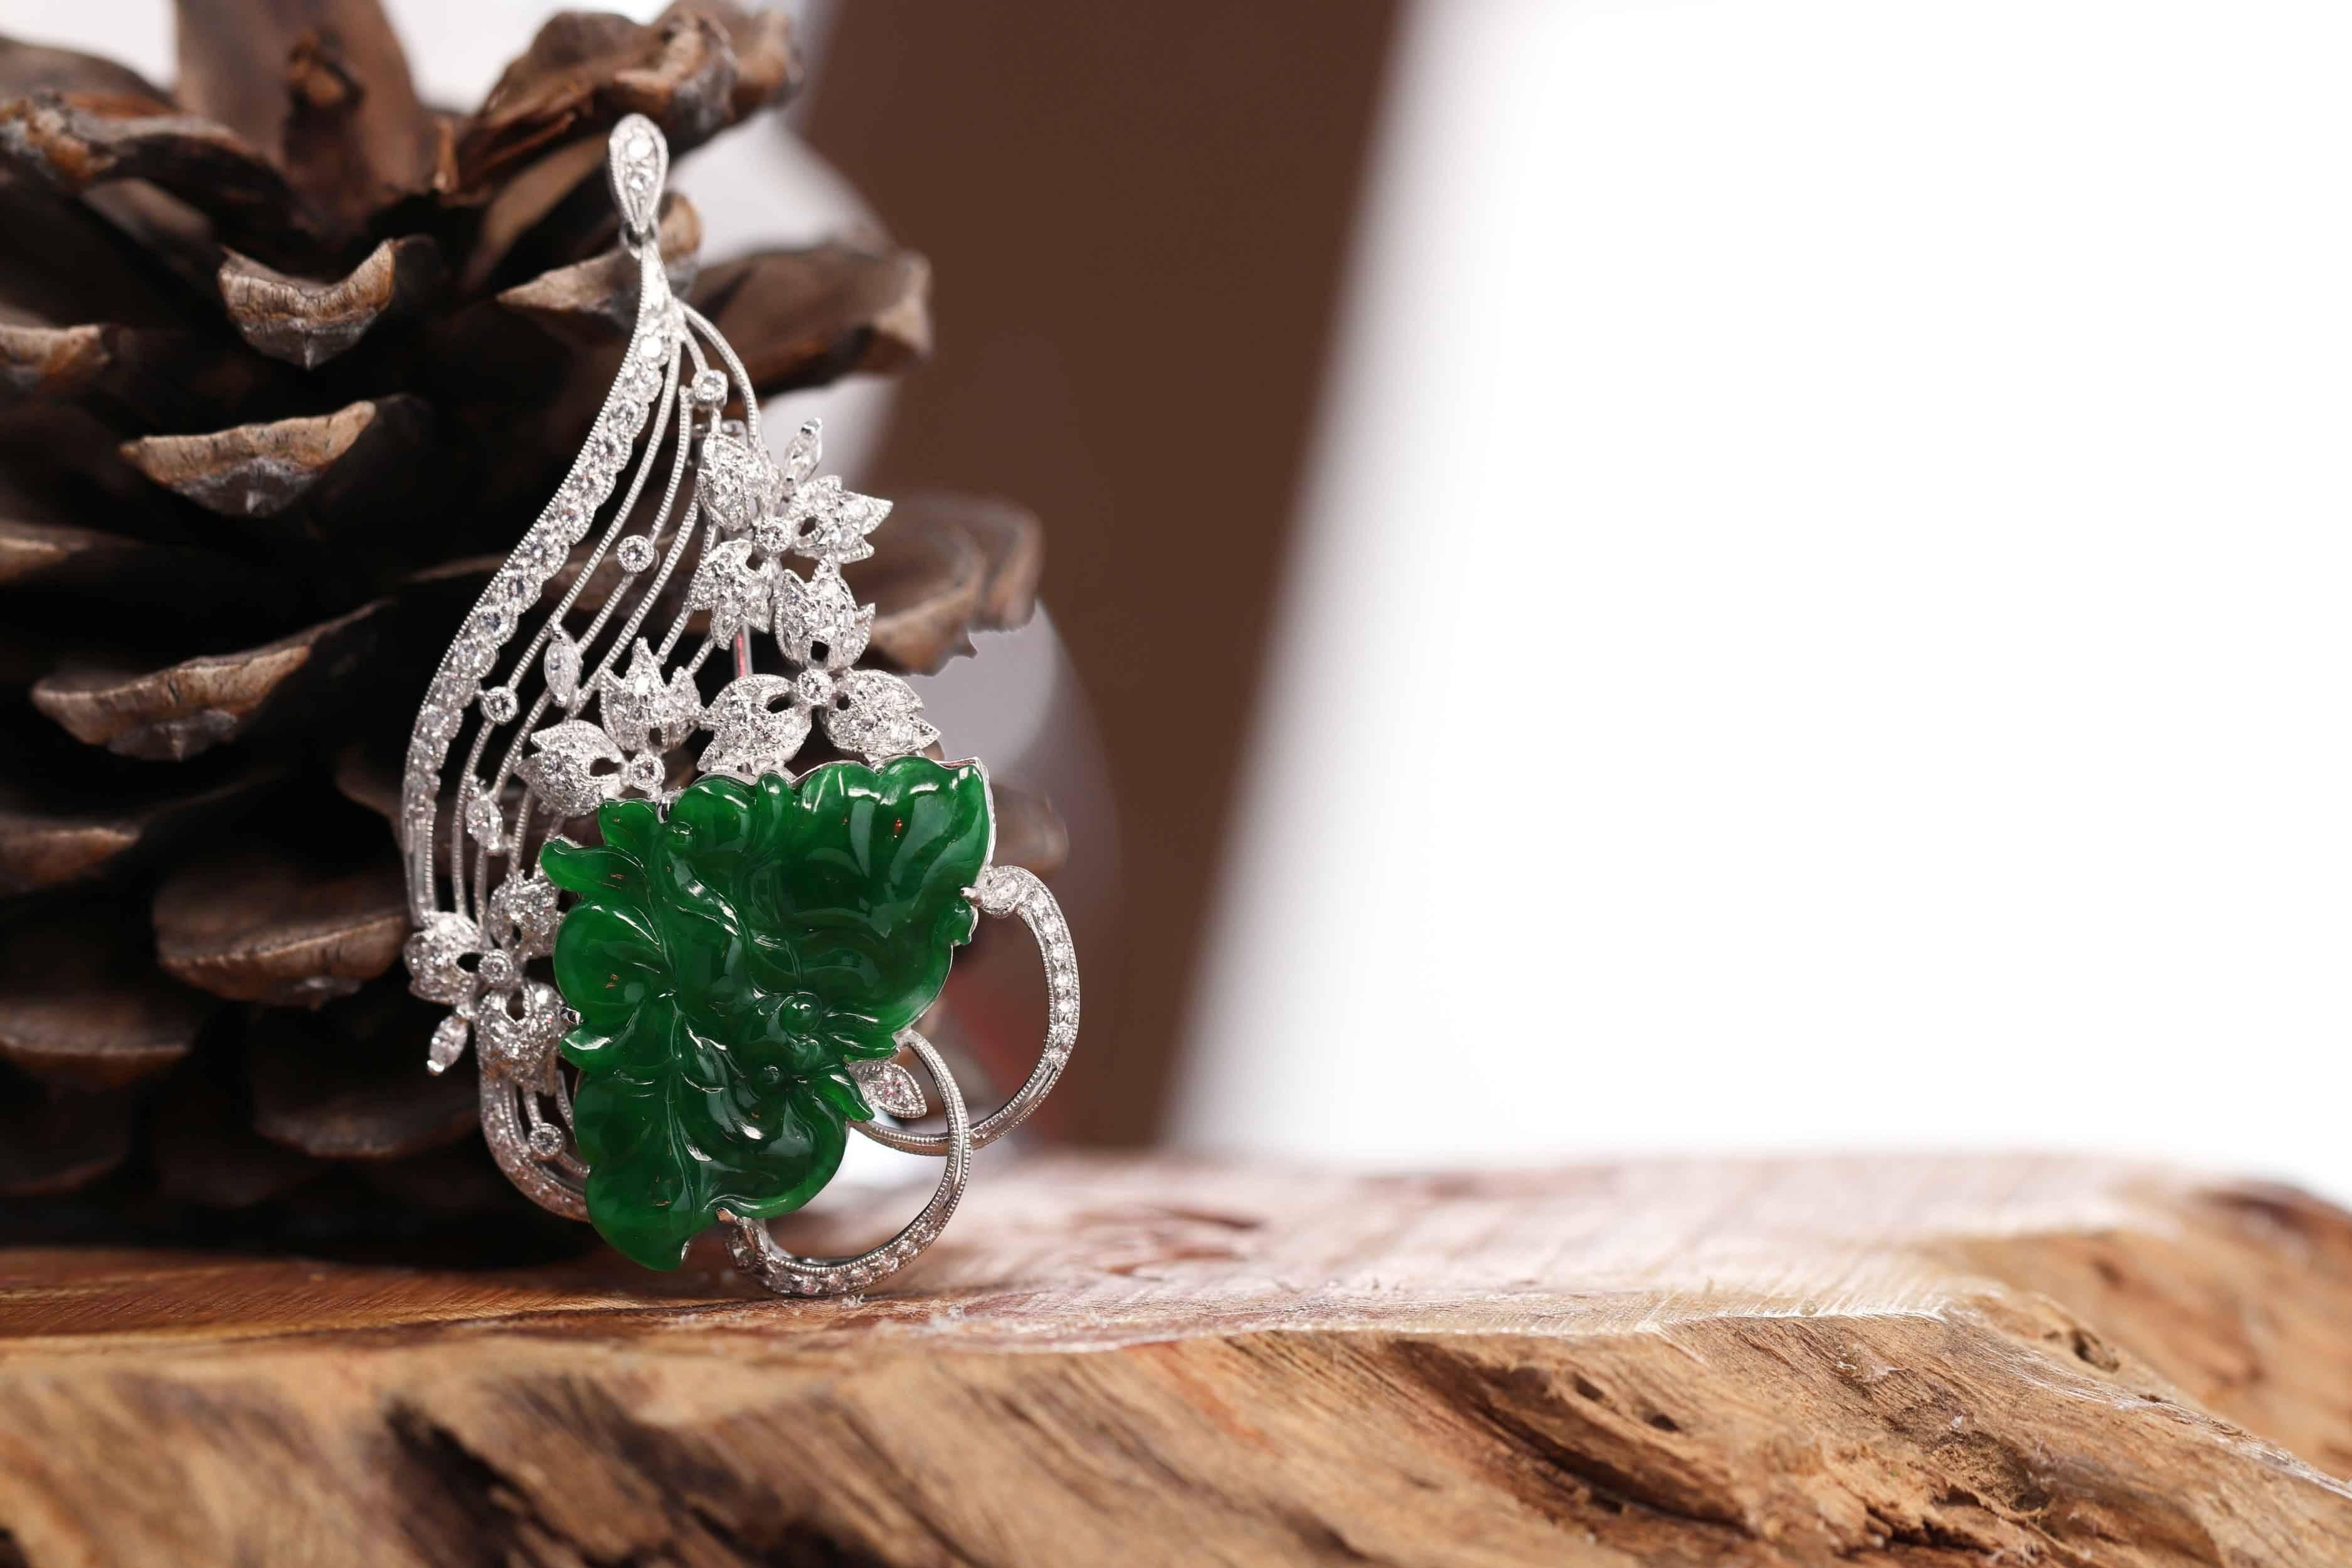 * DESIGN CONCEPT--- This necklace is made with genuine imperial green Burmese jadeite jade. The design was inspired by the simplistic yet elegant shape of a butterfly. Representing wholeness, completeness, and contentment. The unique finish on the